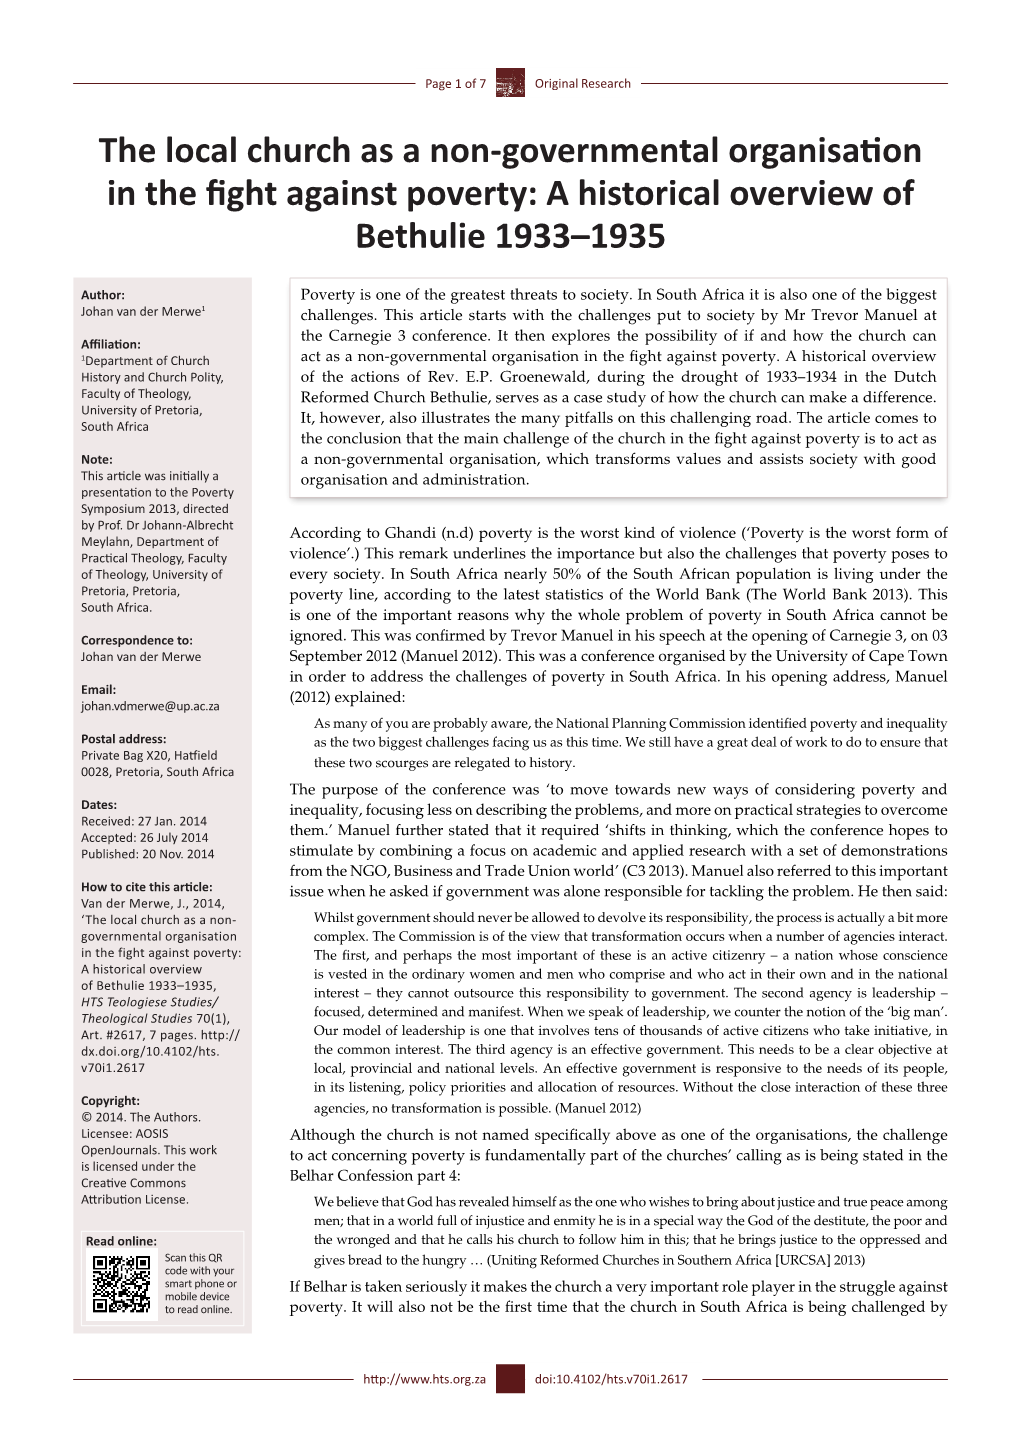 The Local Church As a Non-Governmental Organisation in the Fight Against Poverty: a Historical Overview of Bethulie 1933–1935